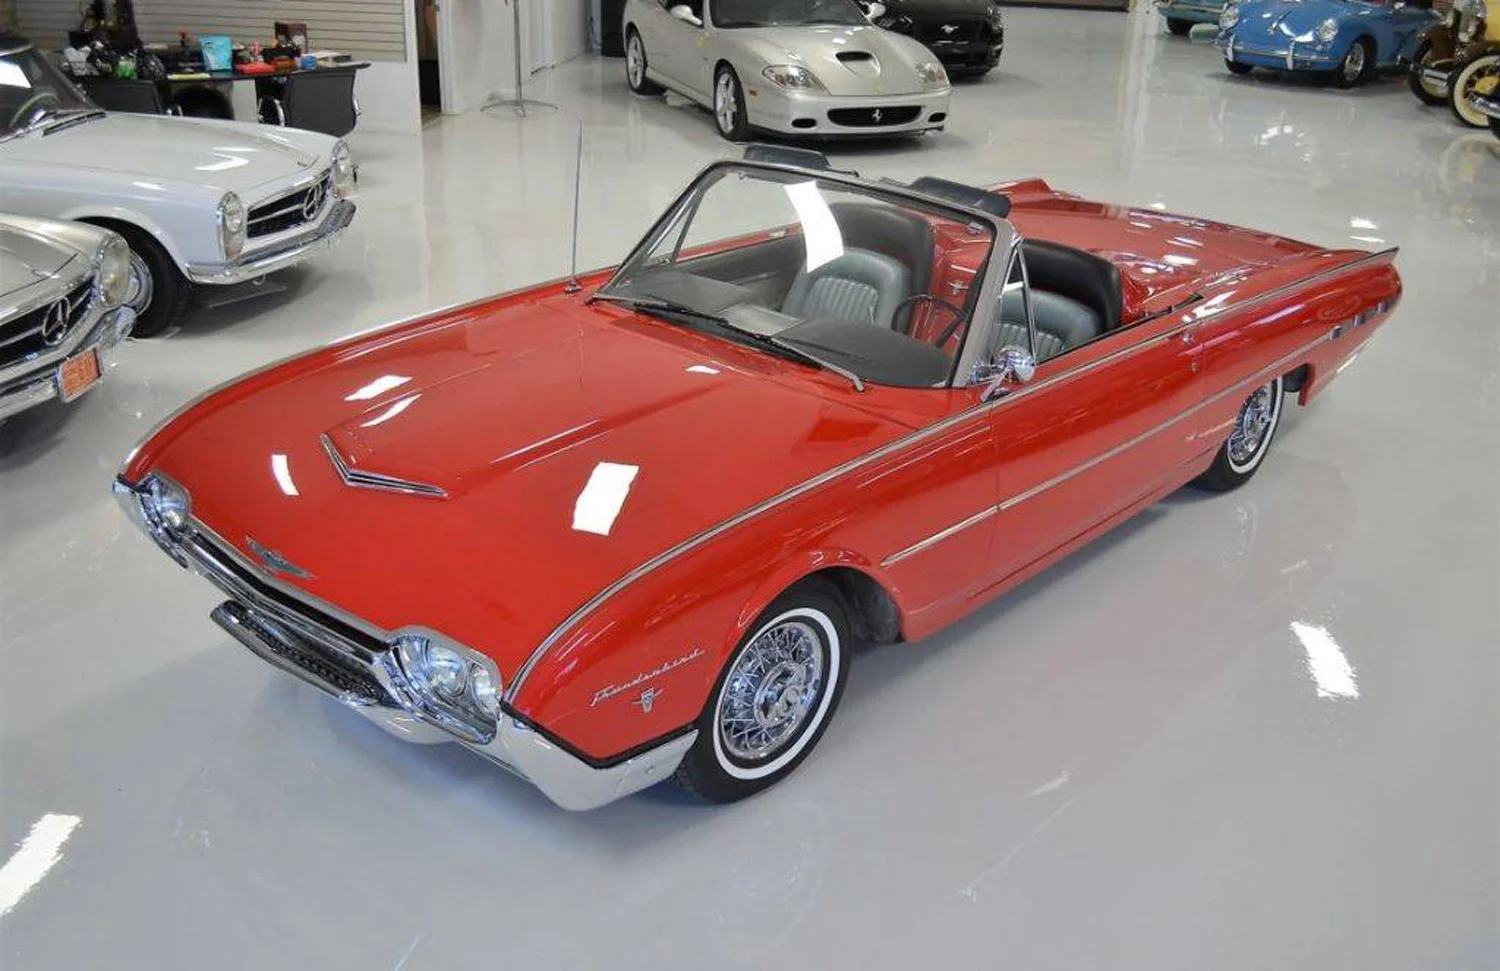 1962 ford thunderbird roadster is a beauty 1962 ford thunderbird roadster is a beauty